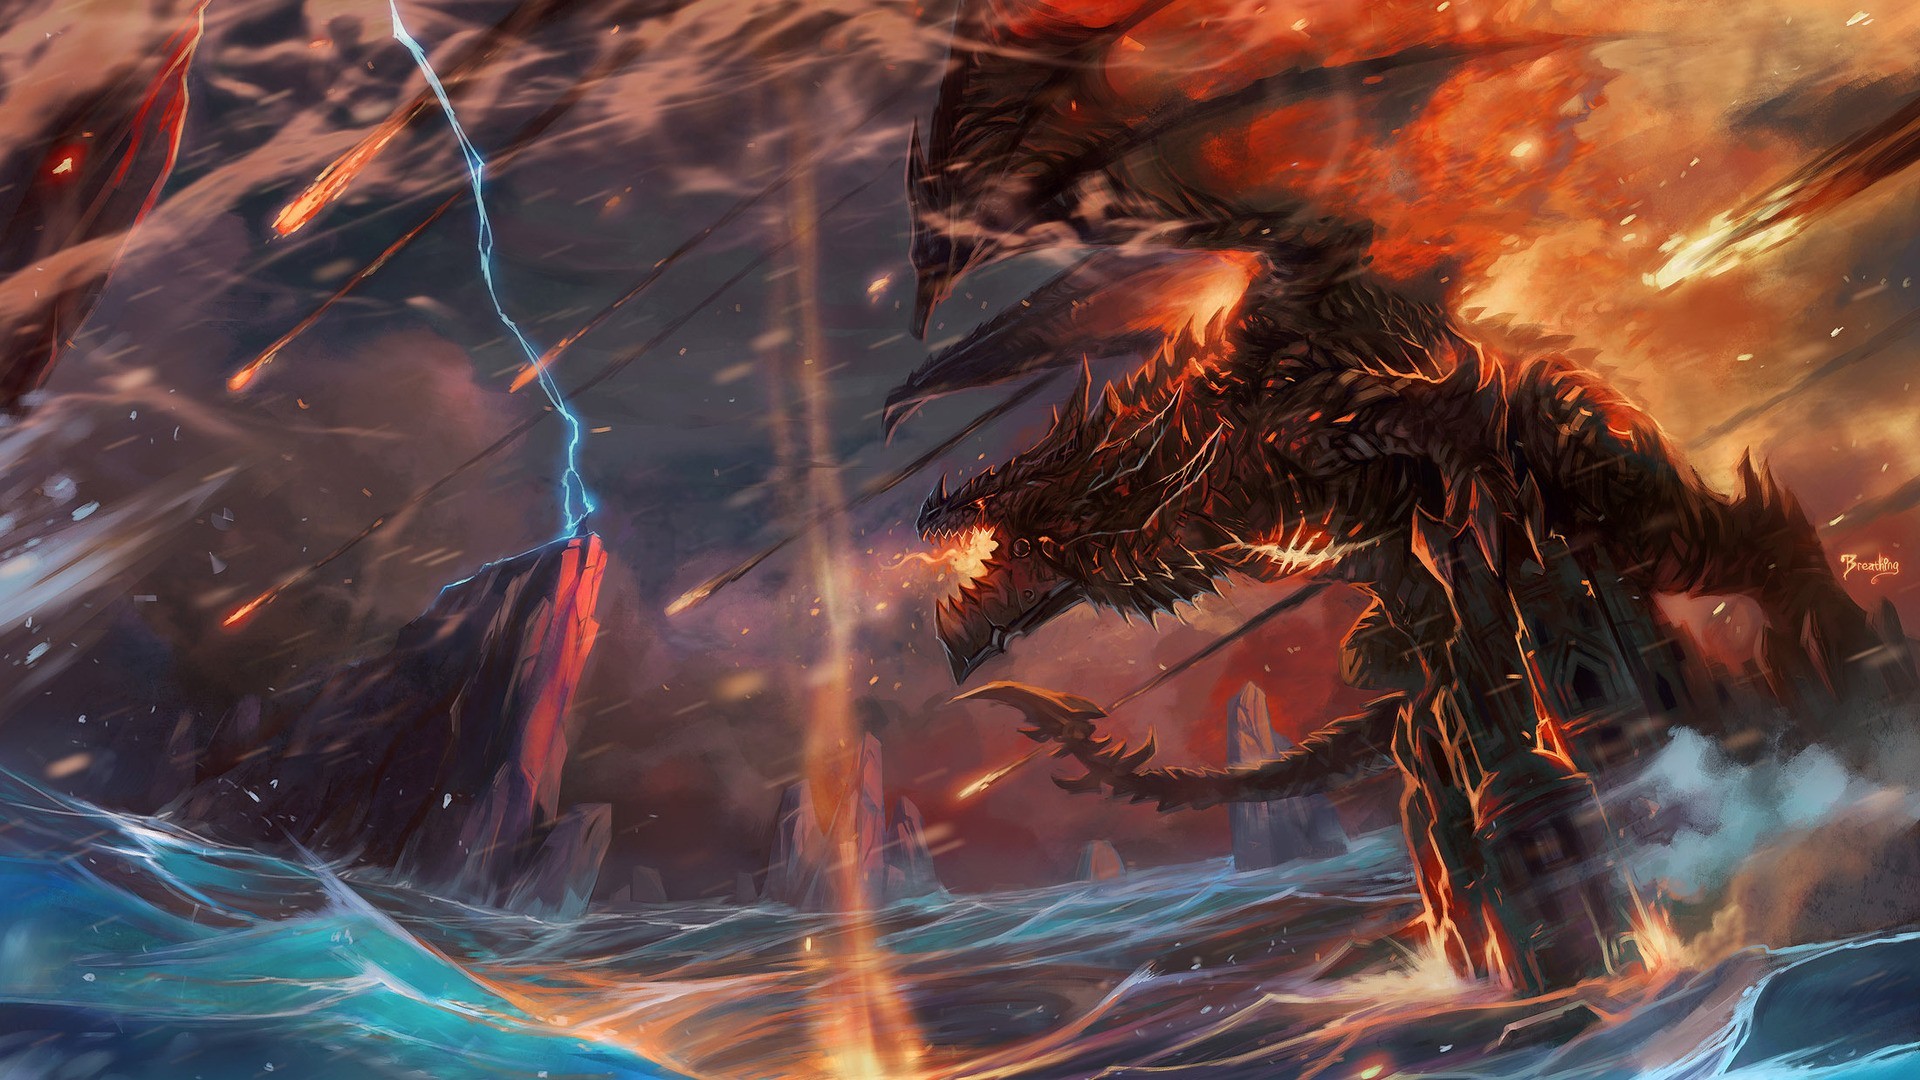 General 1920x1080 dragon World of Warcraft: Cataclysm Deathwing Thrall video games PC gaming video game art fantasy art creature